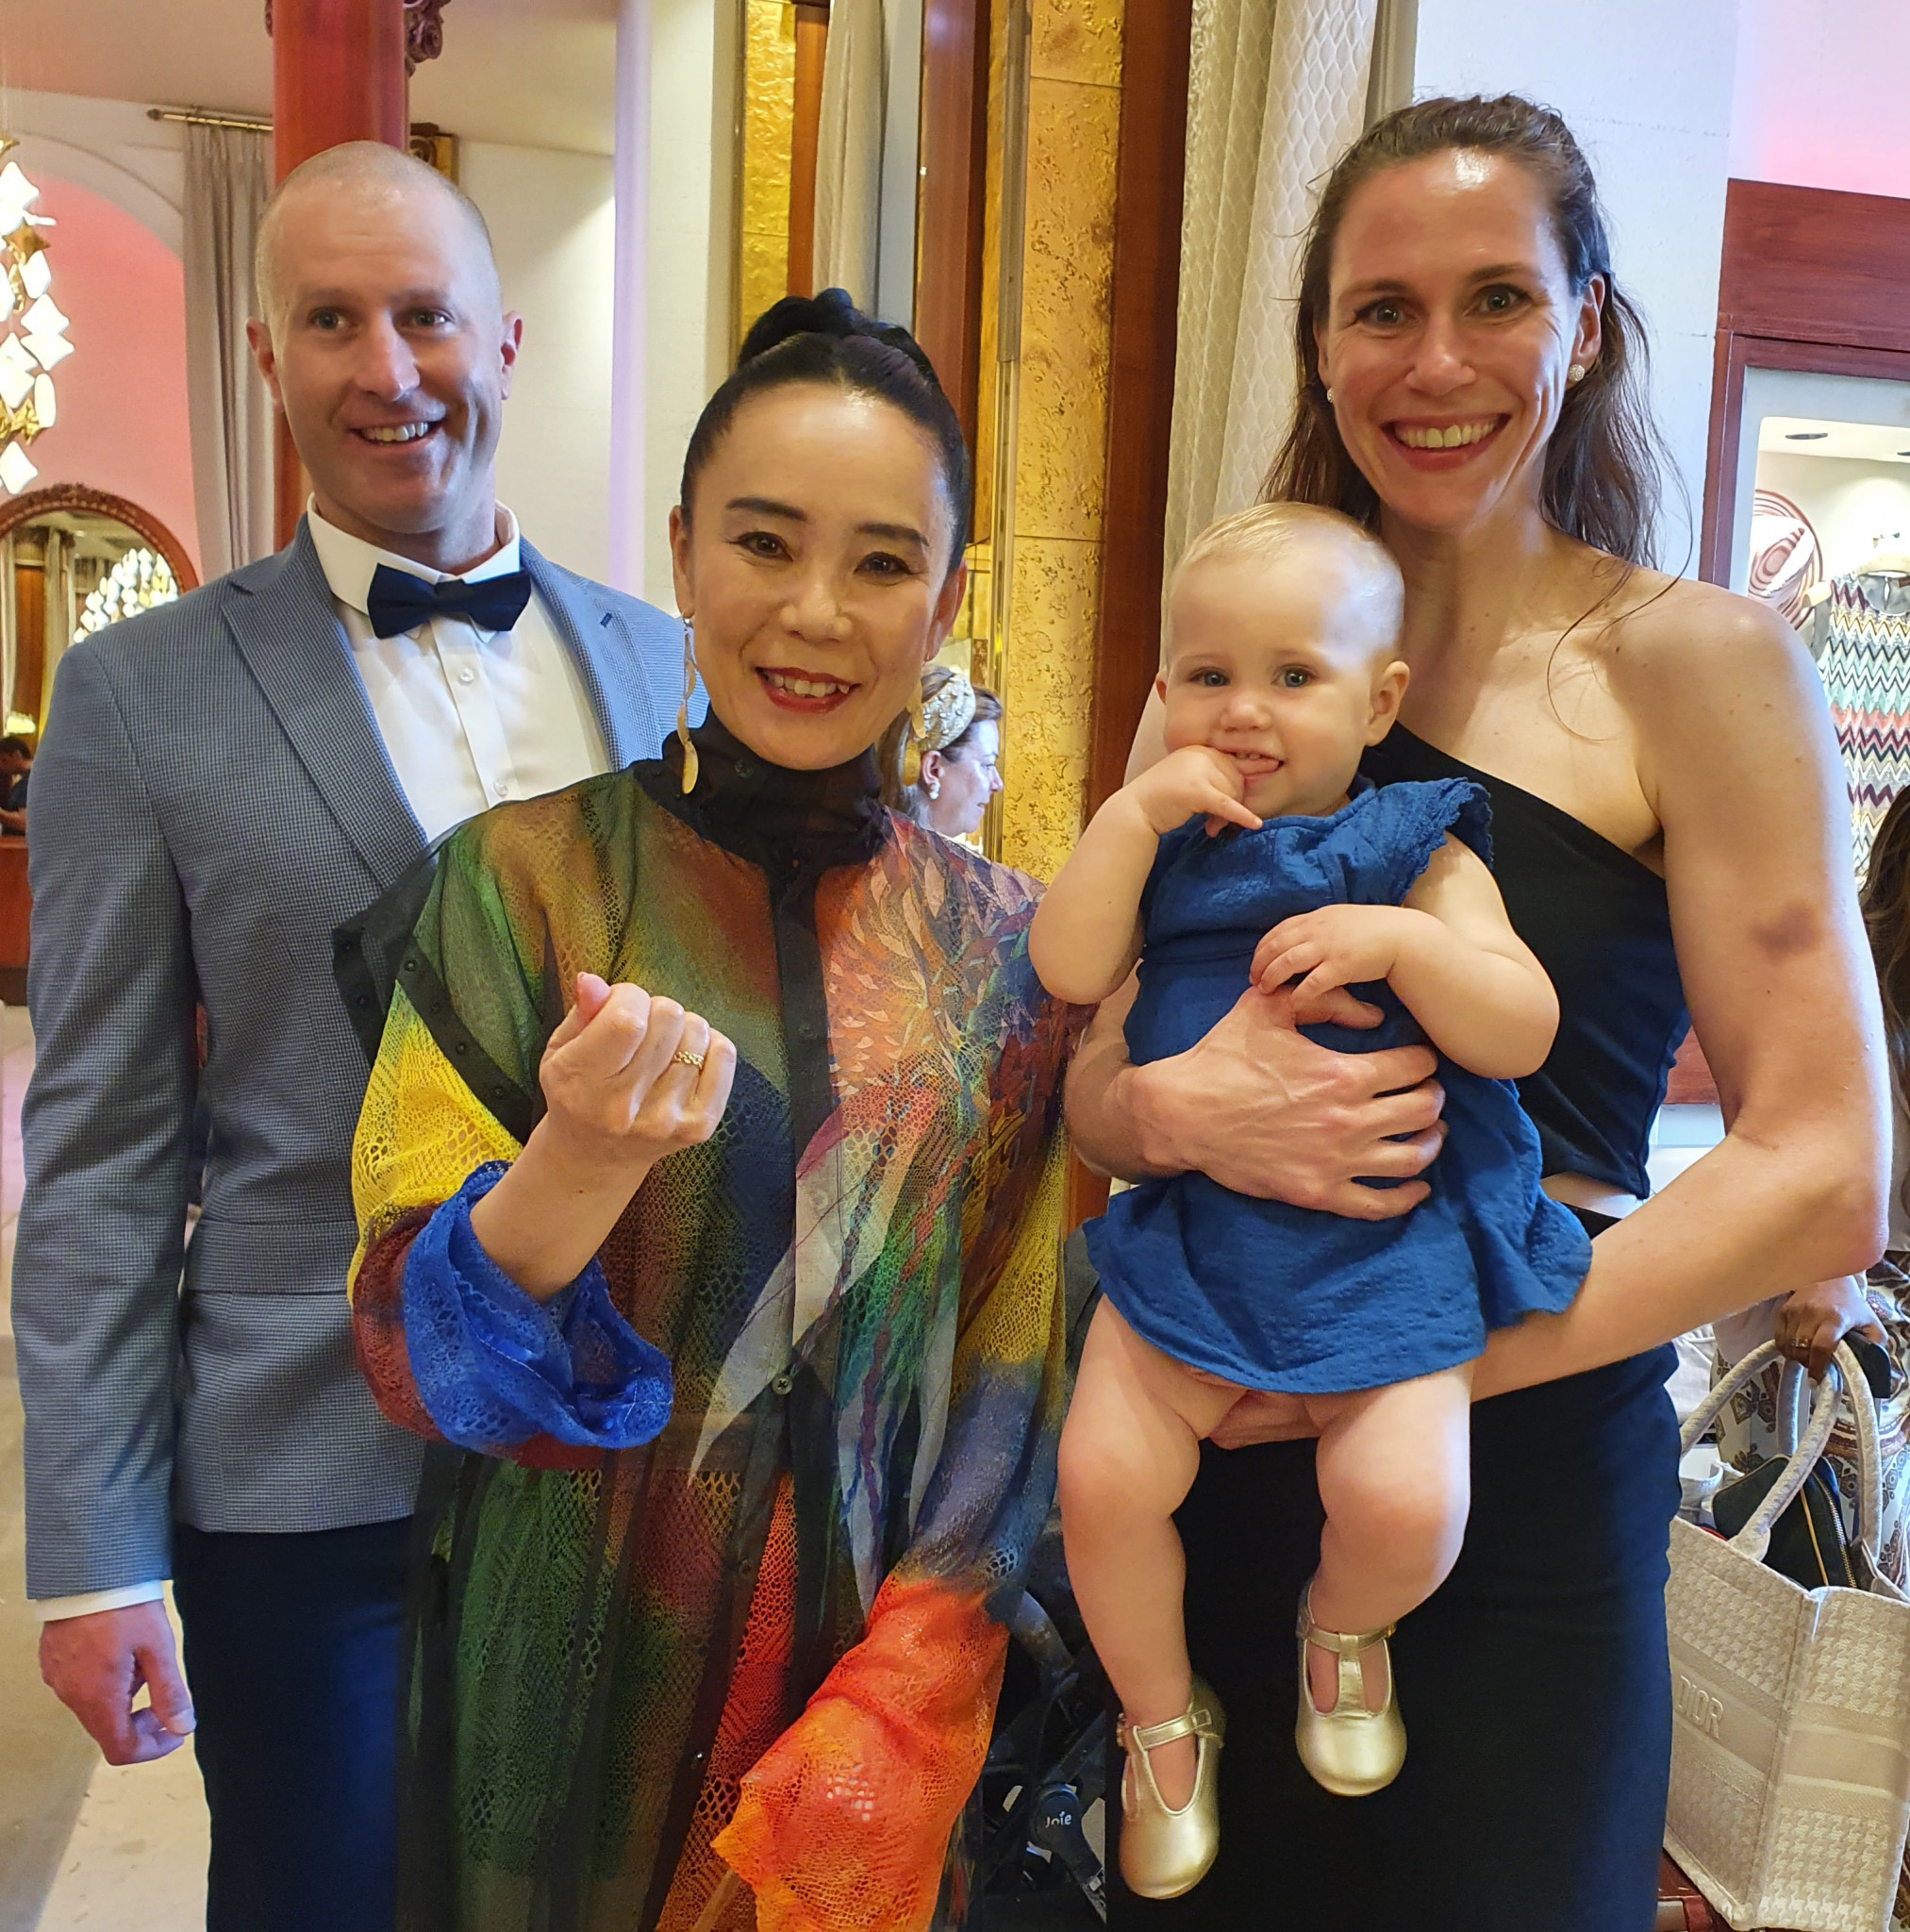 Director Naomi Kawase was joined by Kim Gaucher, baby Sophie and husband Ben for the premiere in Cannes ©IOC